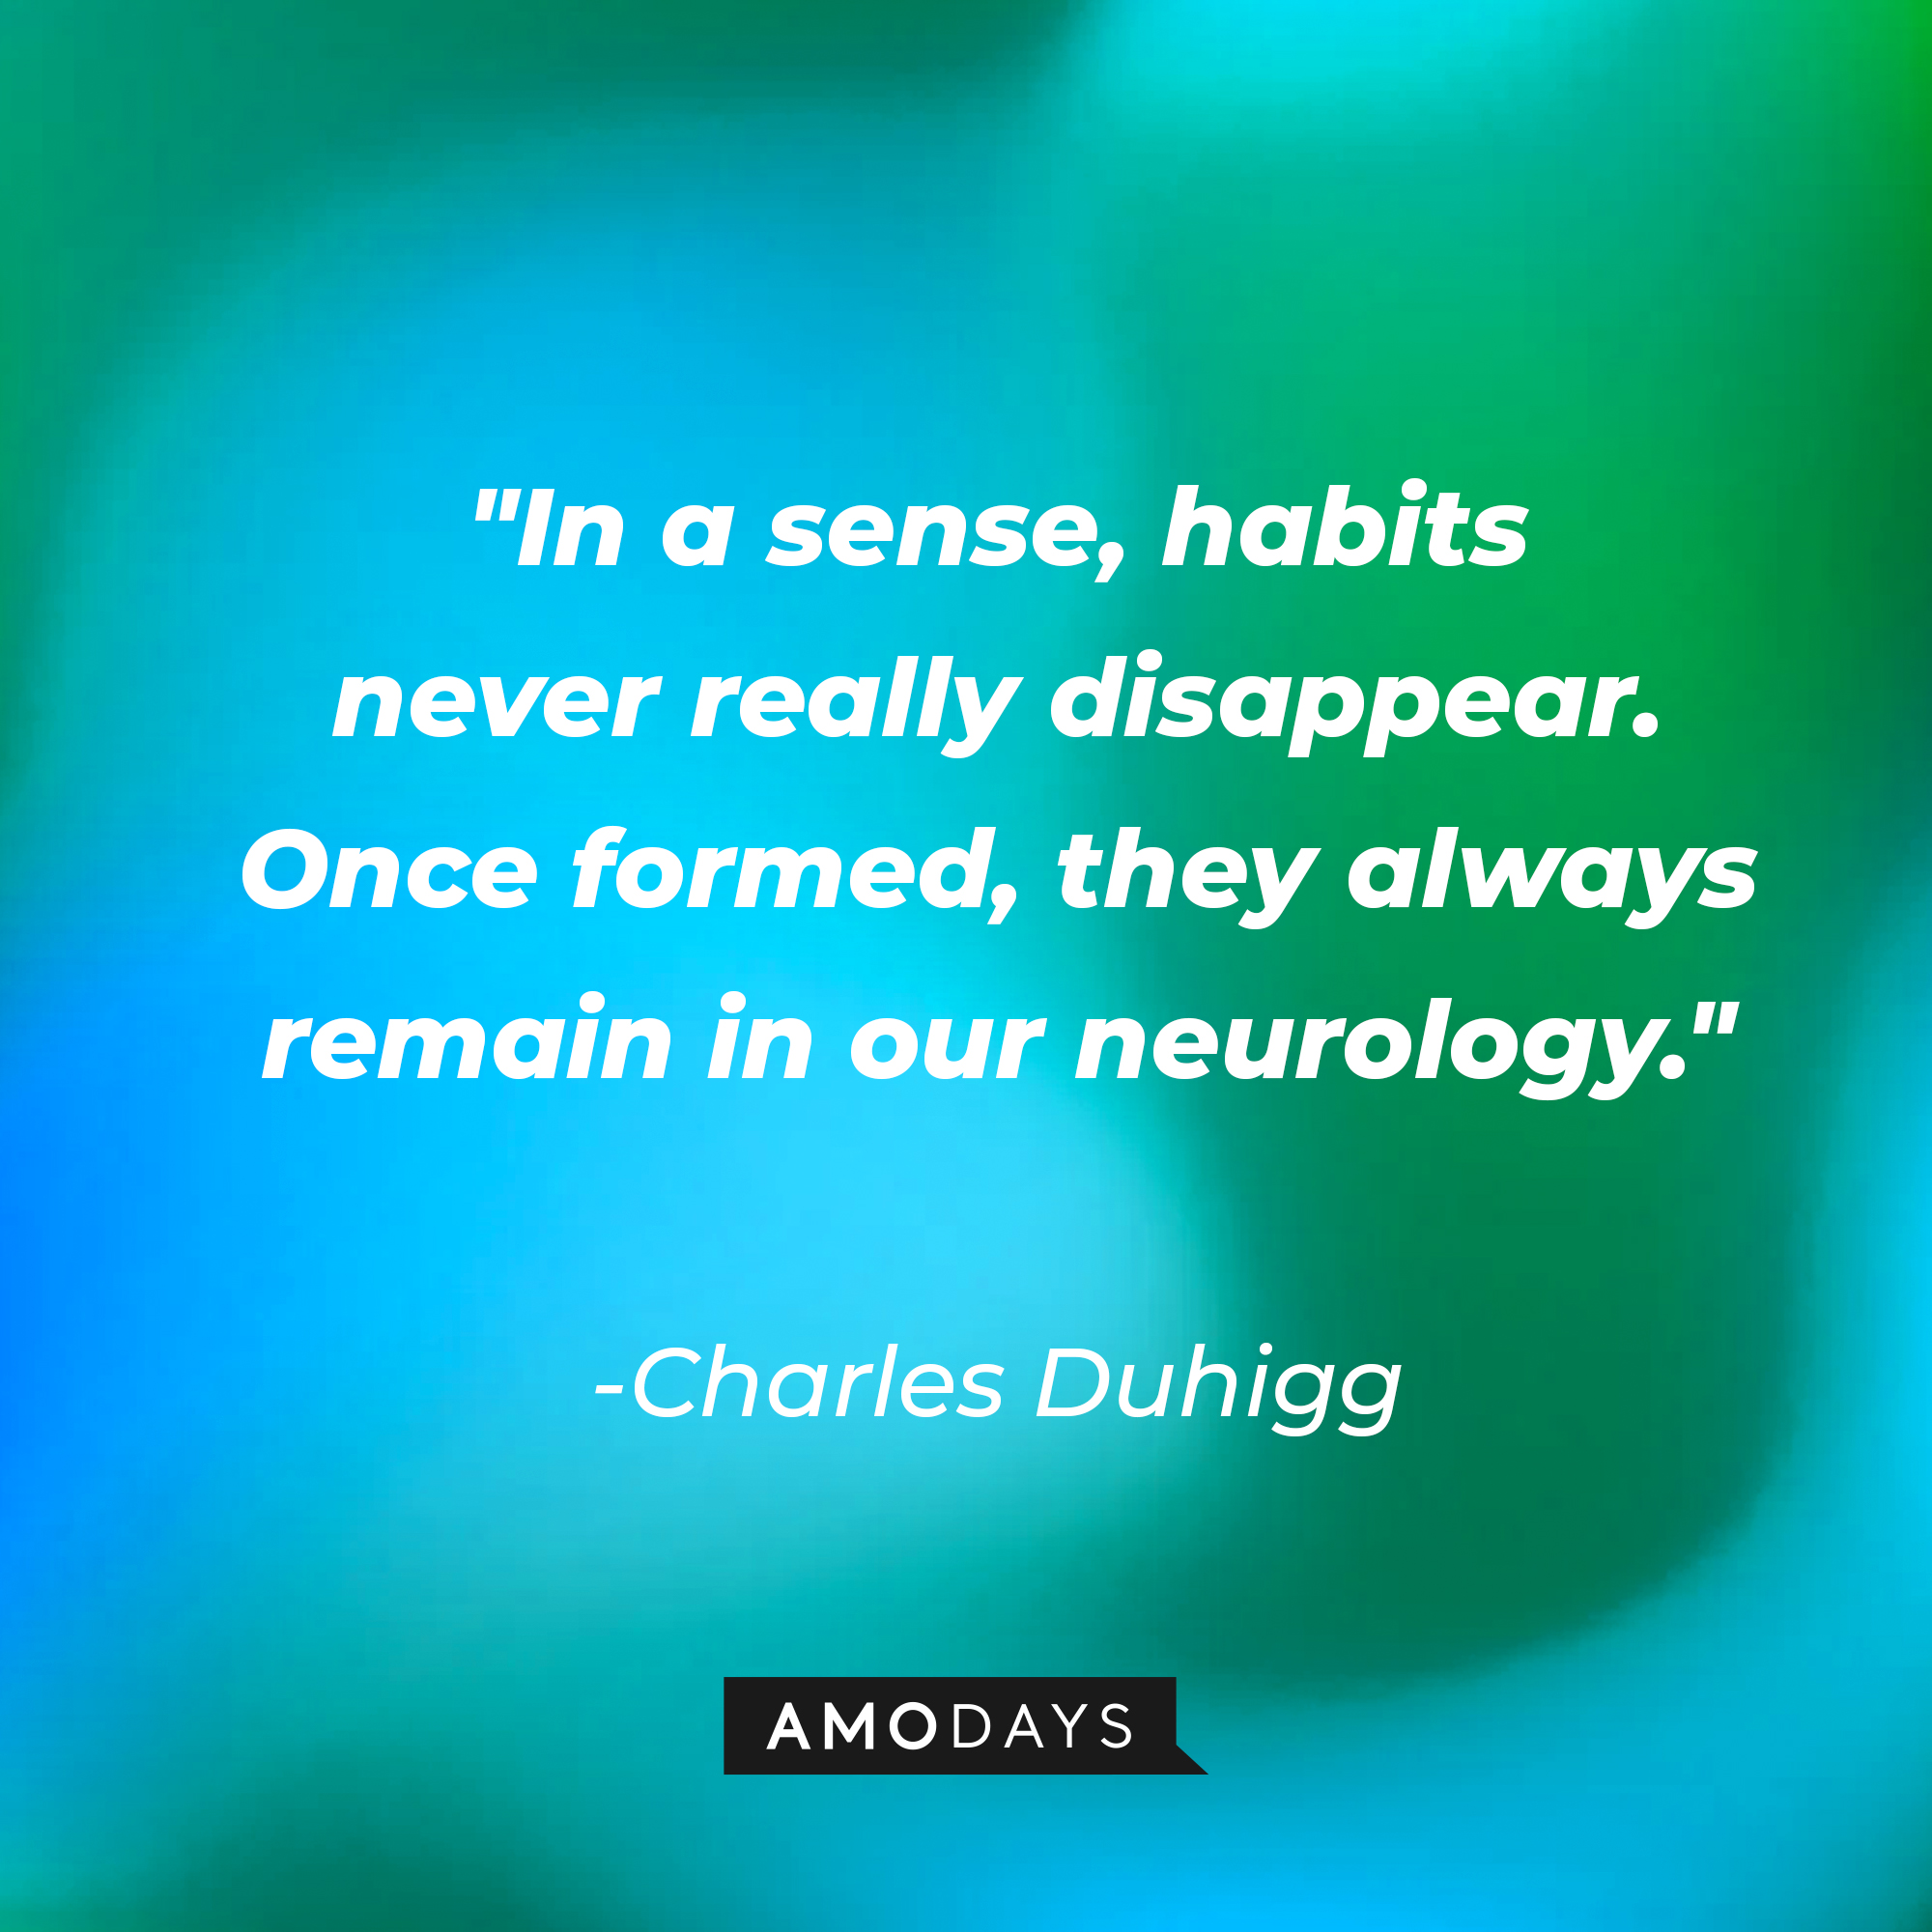 Charles Duhigg's quote: "In a sense, habits never really disappear. Once formed, they always remain in our neurology." | Image: AmoDays